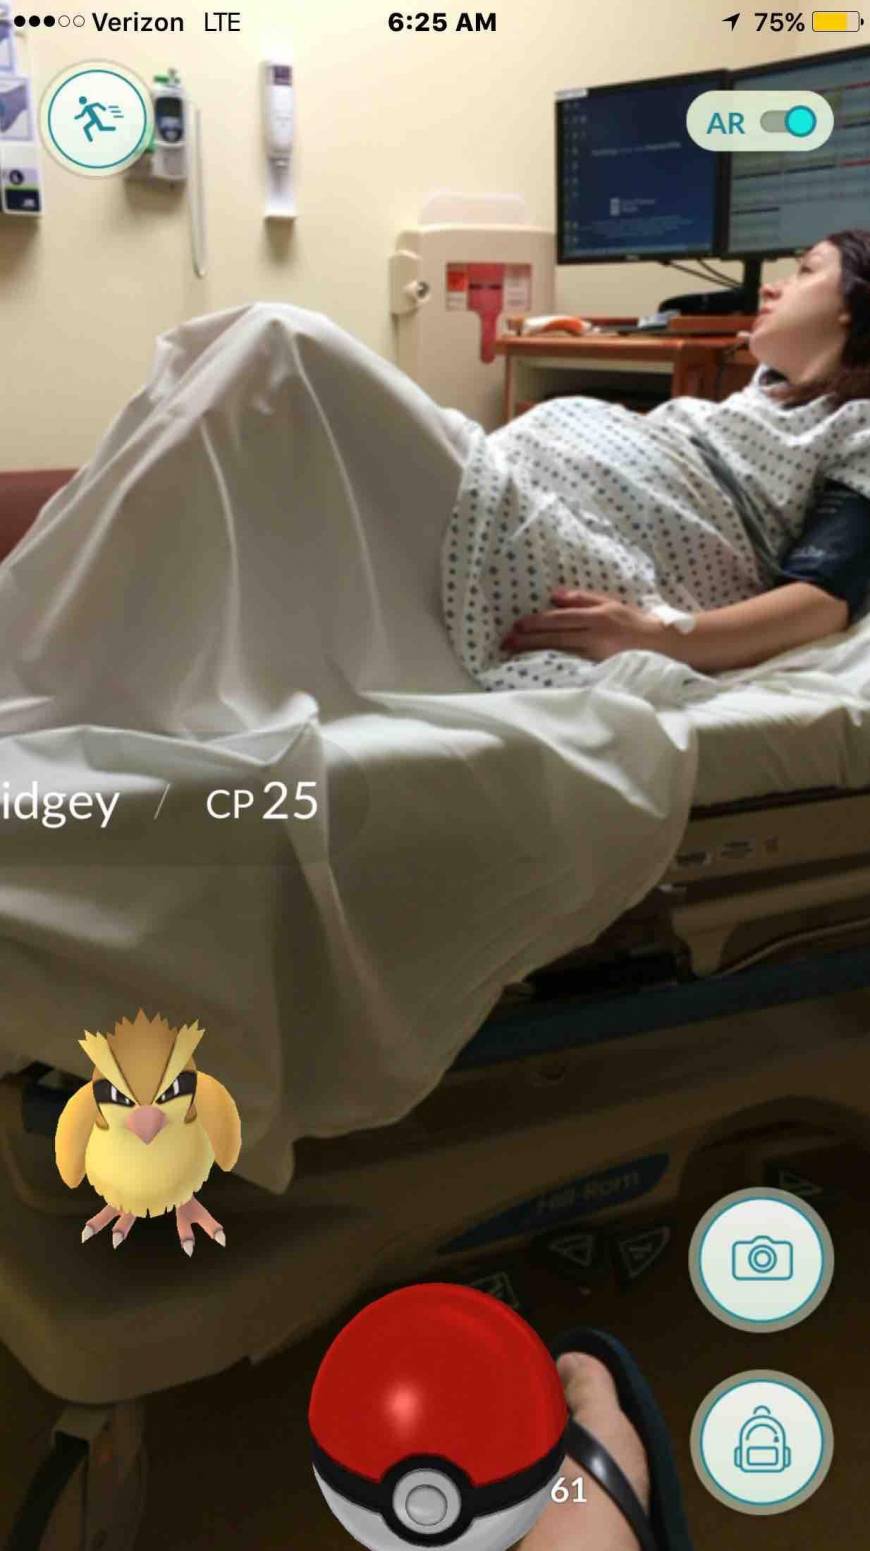 man-catches-pidgey-while-wife-gives-birth-photo-u1